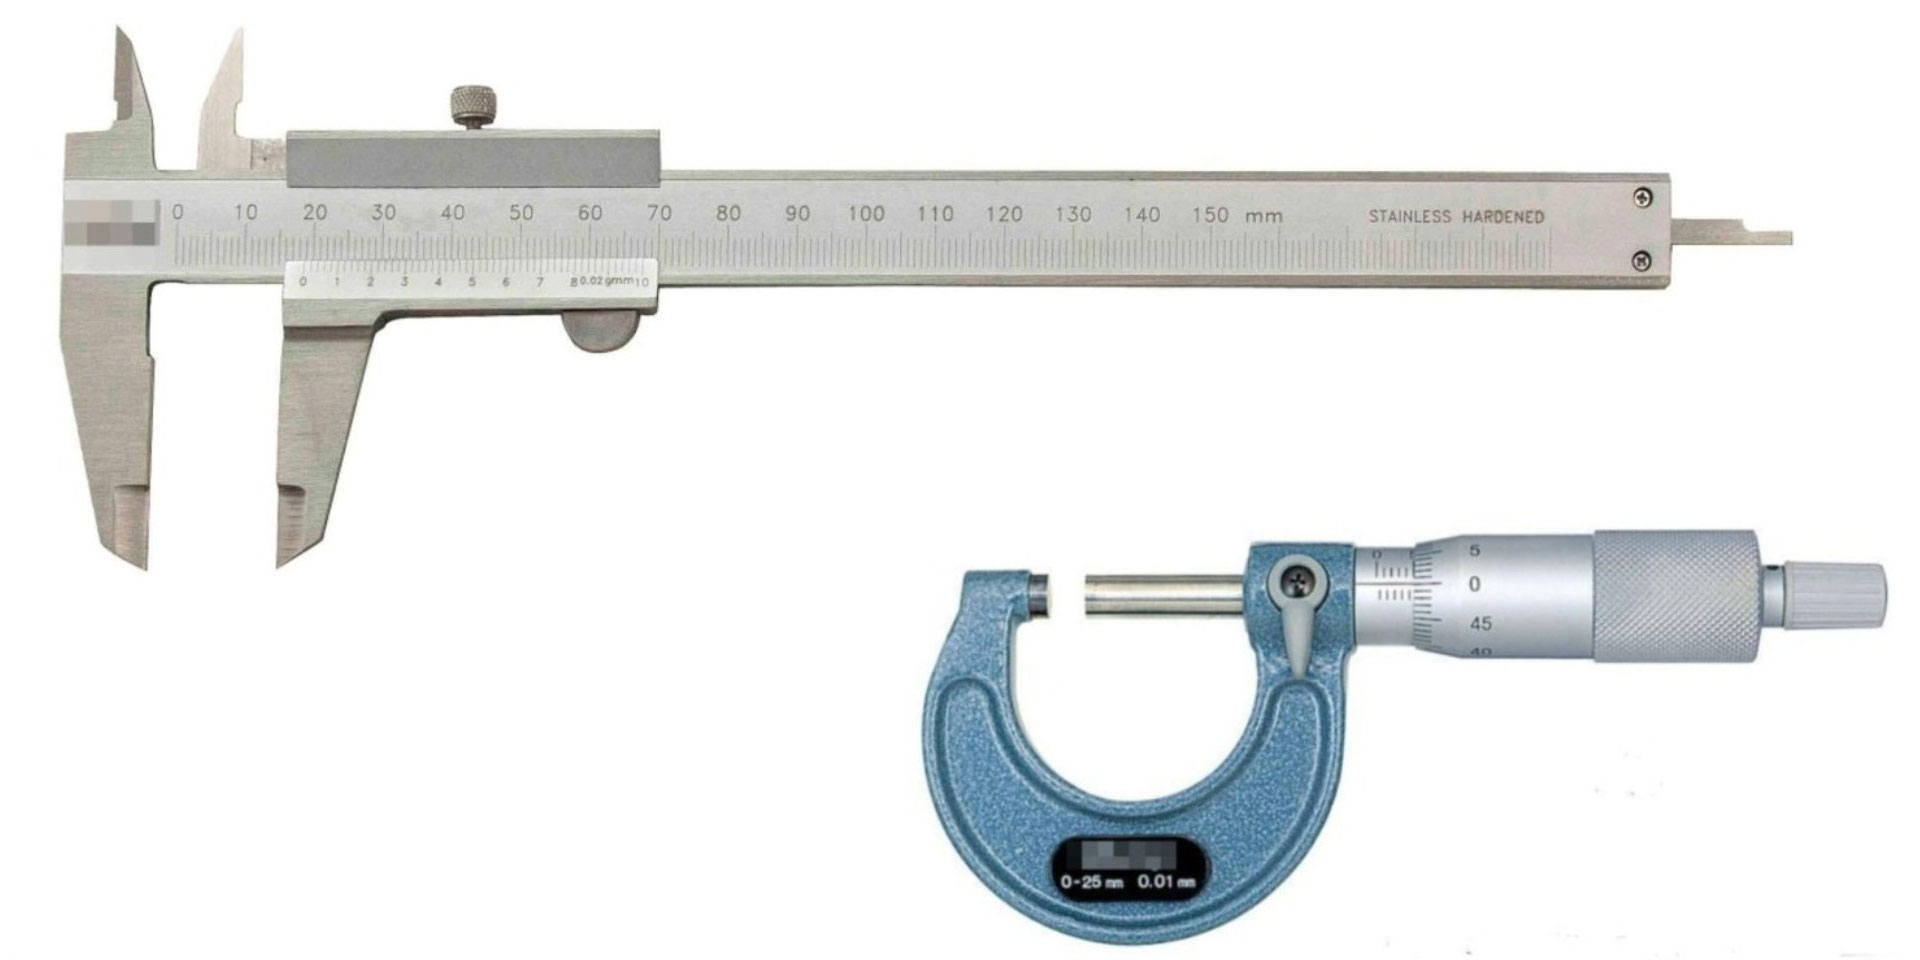 What is the difference between a caliper and a micrometer